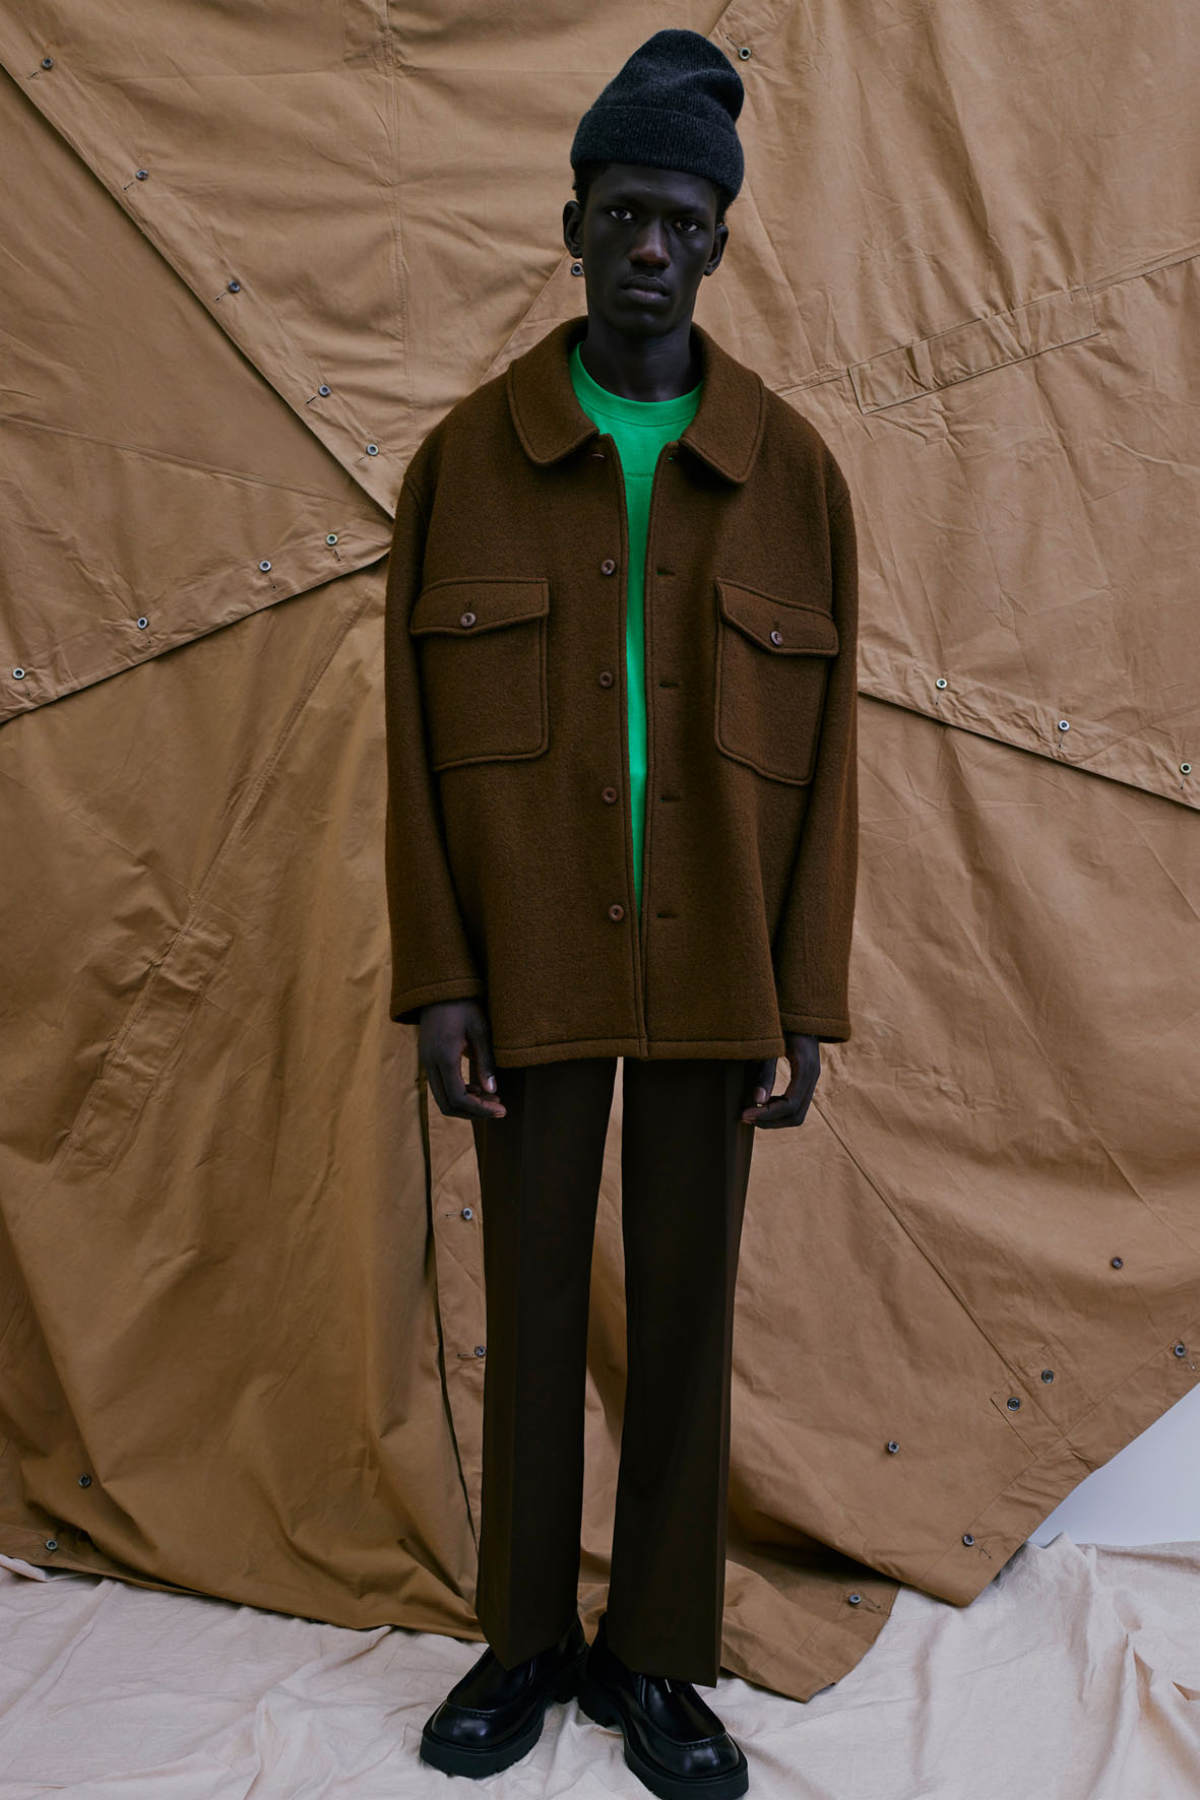 Sandro Presents Its New Fall/Winter 2022 Men Collection